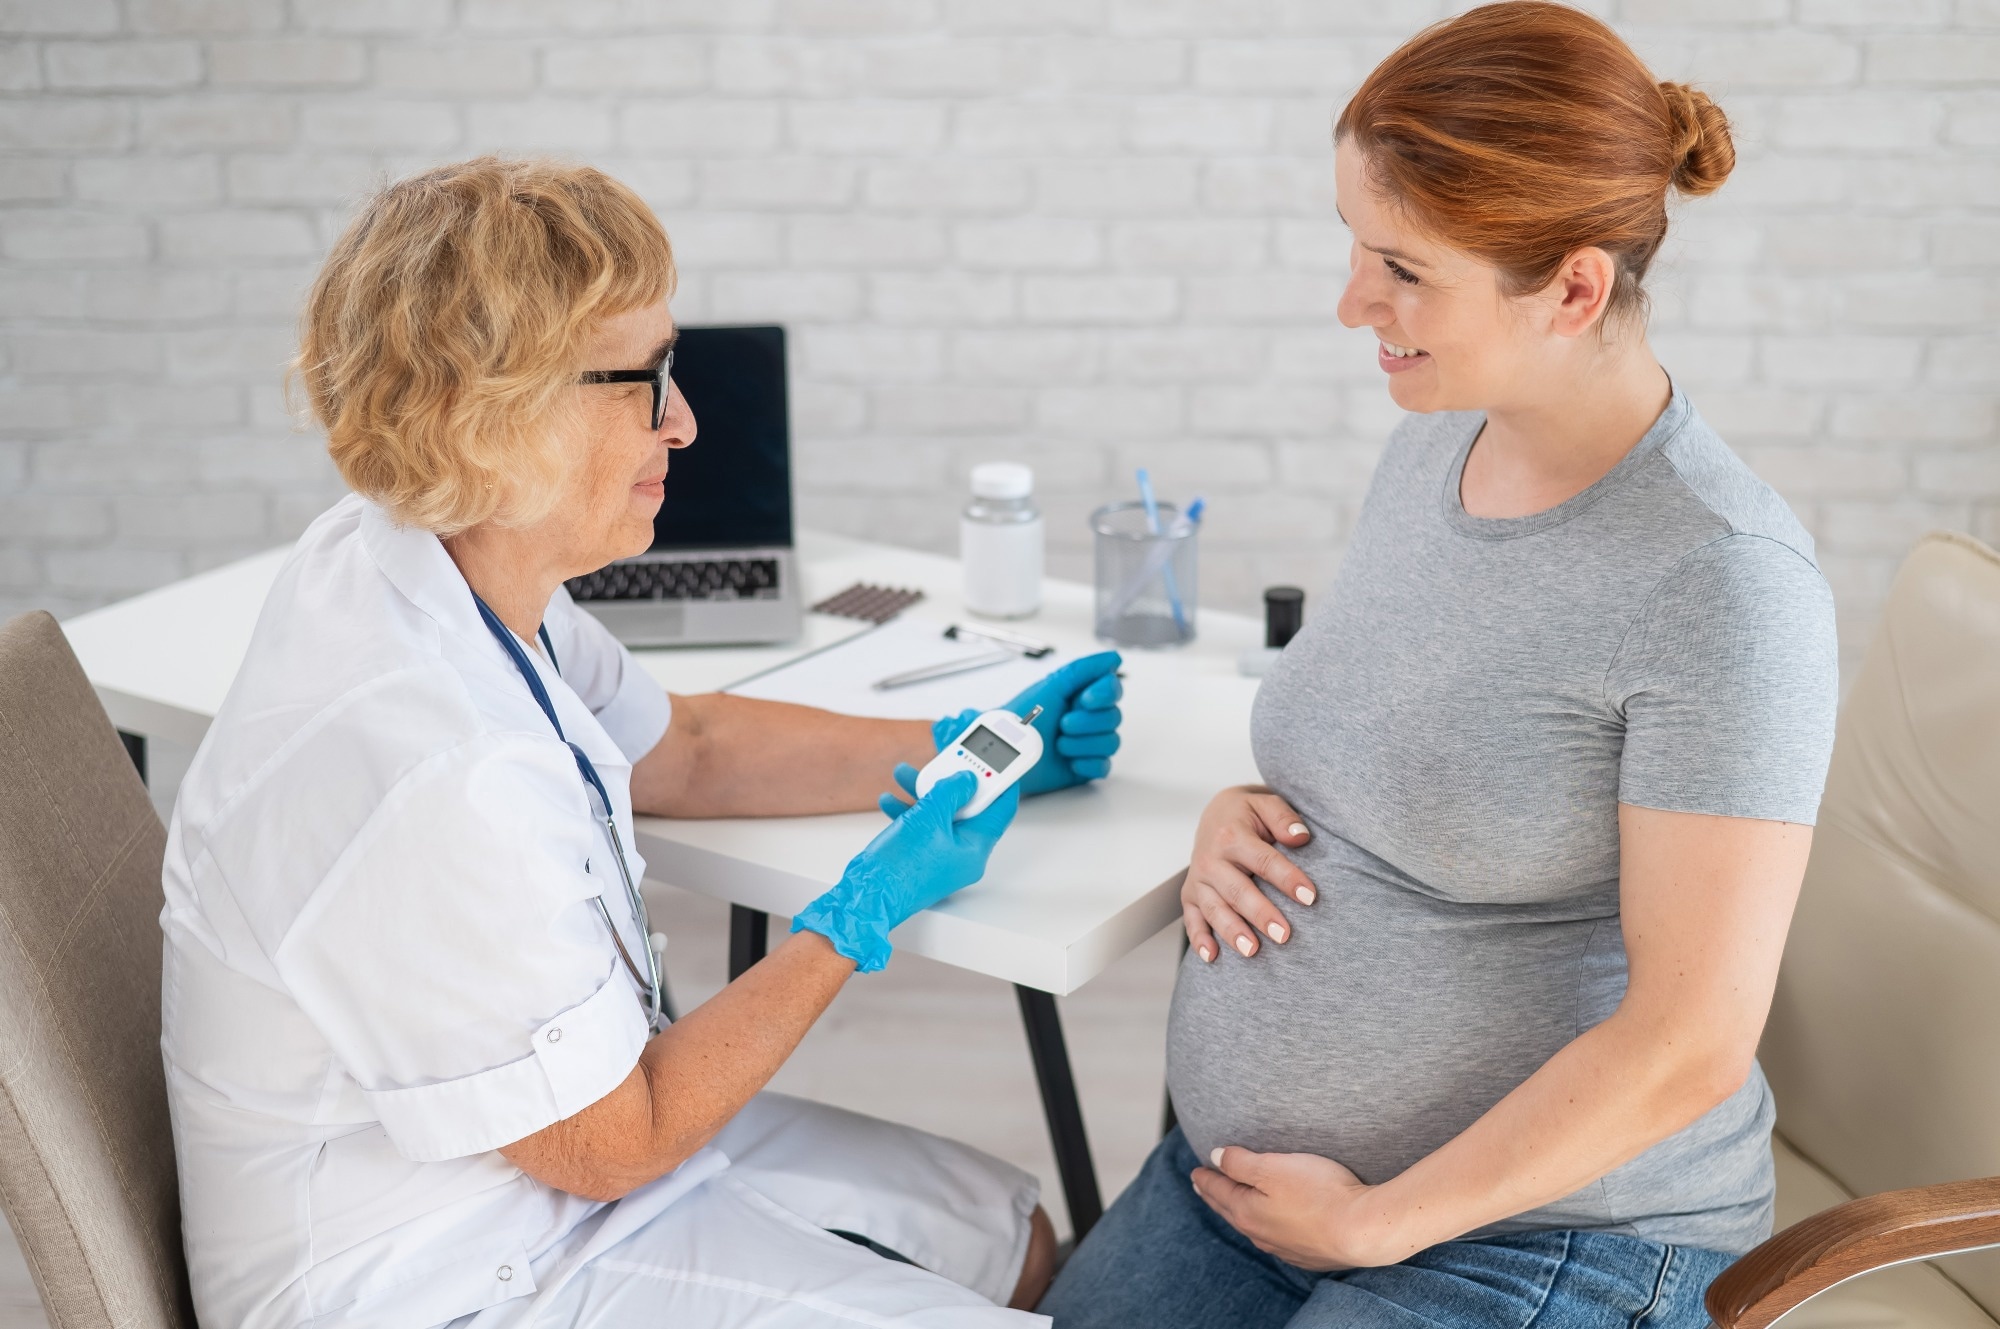 Study: Safety of GLP-1 receptor agonists and other second-line antidiabetics in early pregnancy. Image Credit: Reshetnikov_art / Shutterstock.com